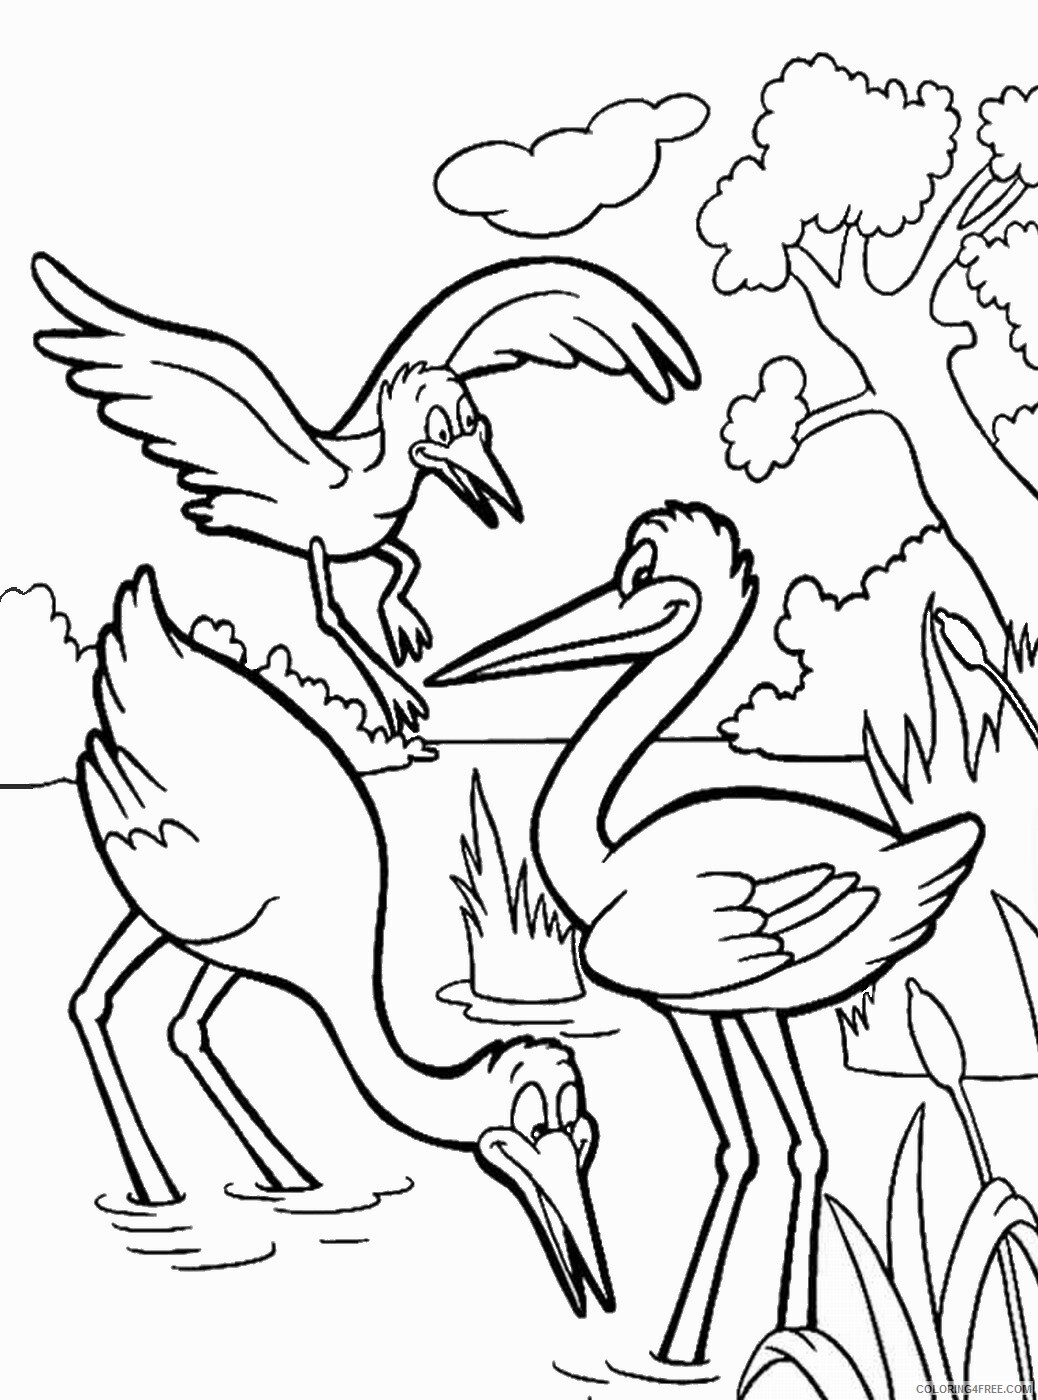 Stork Coloring Pages Animal Printable Sheets storks 6 2021 4722 Coloring4free